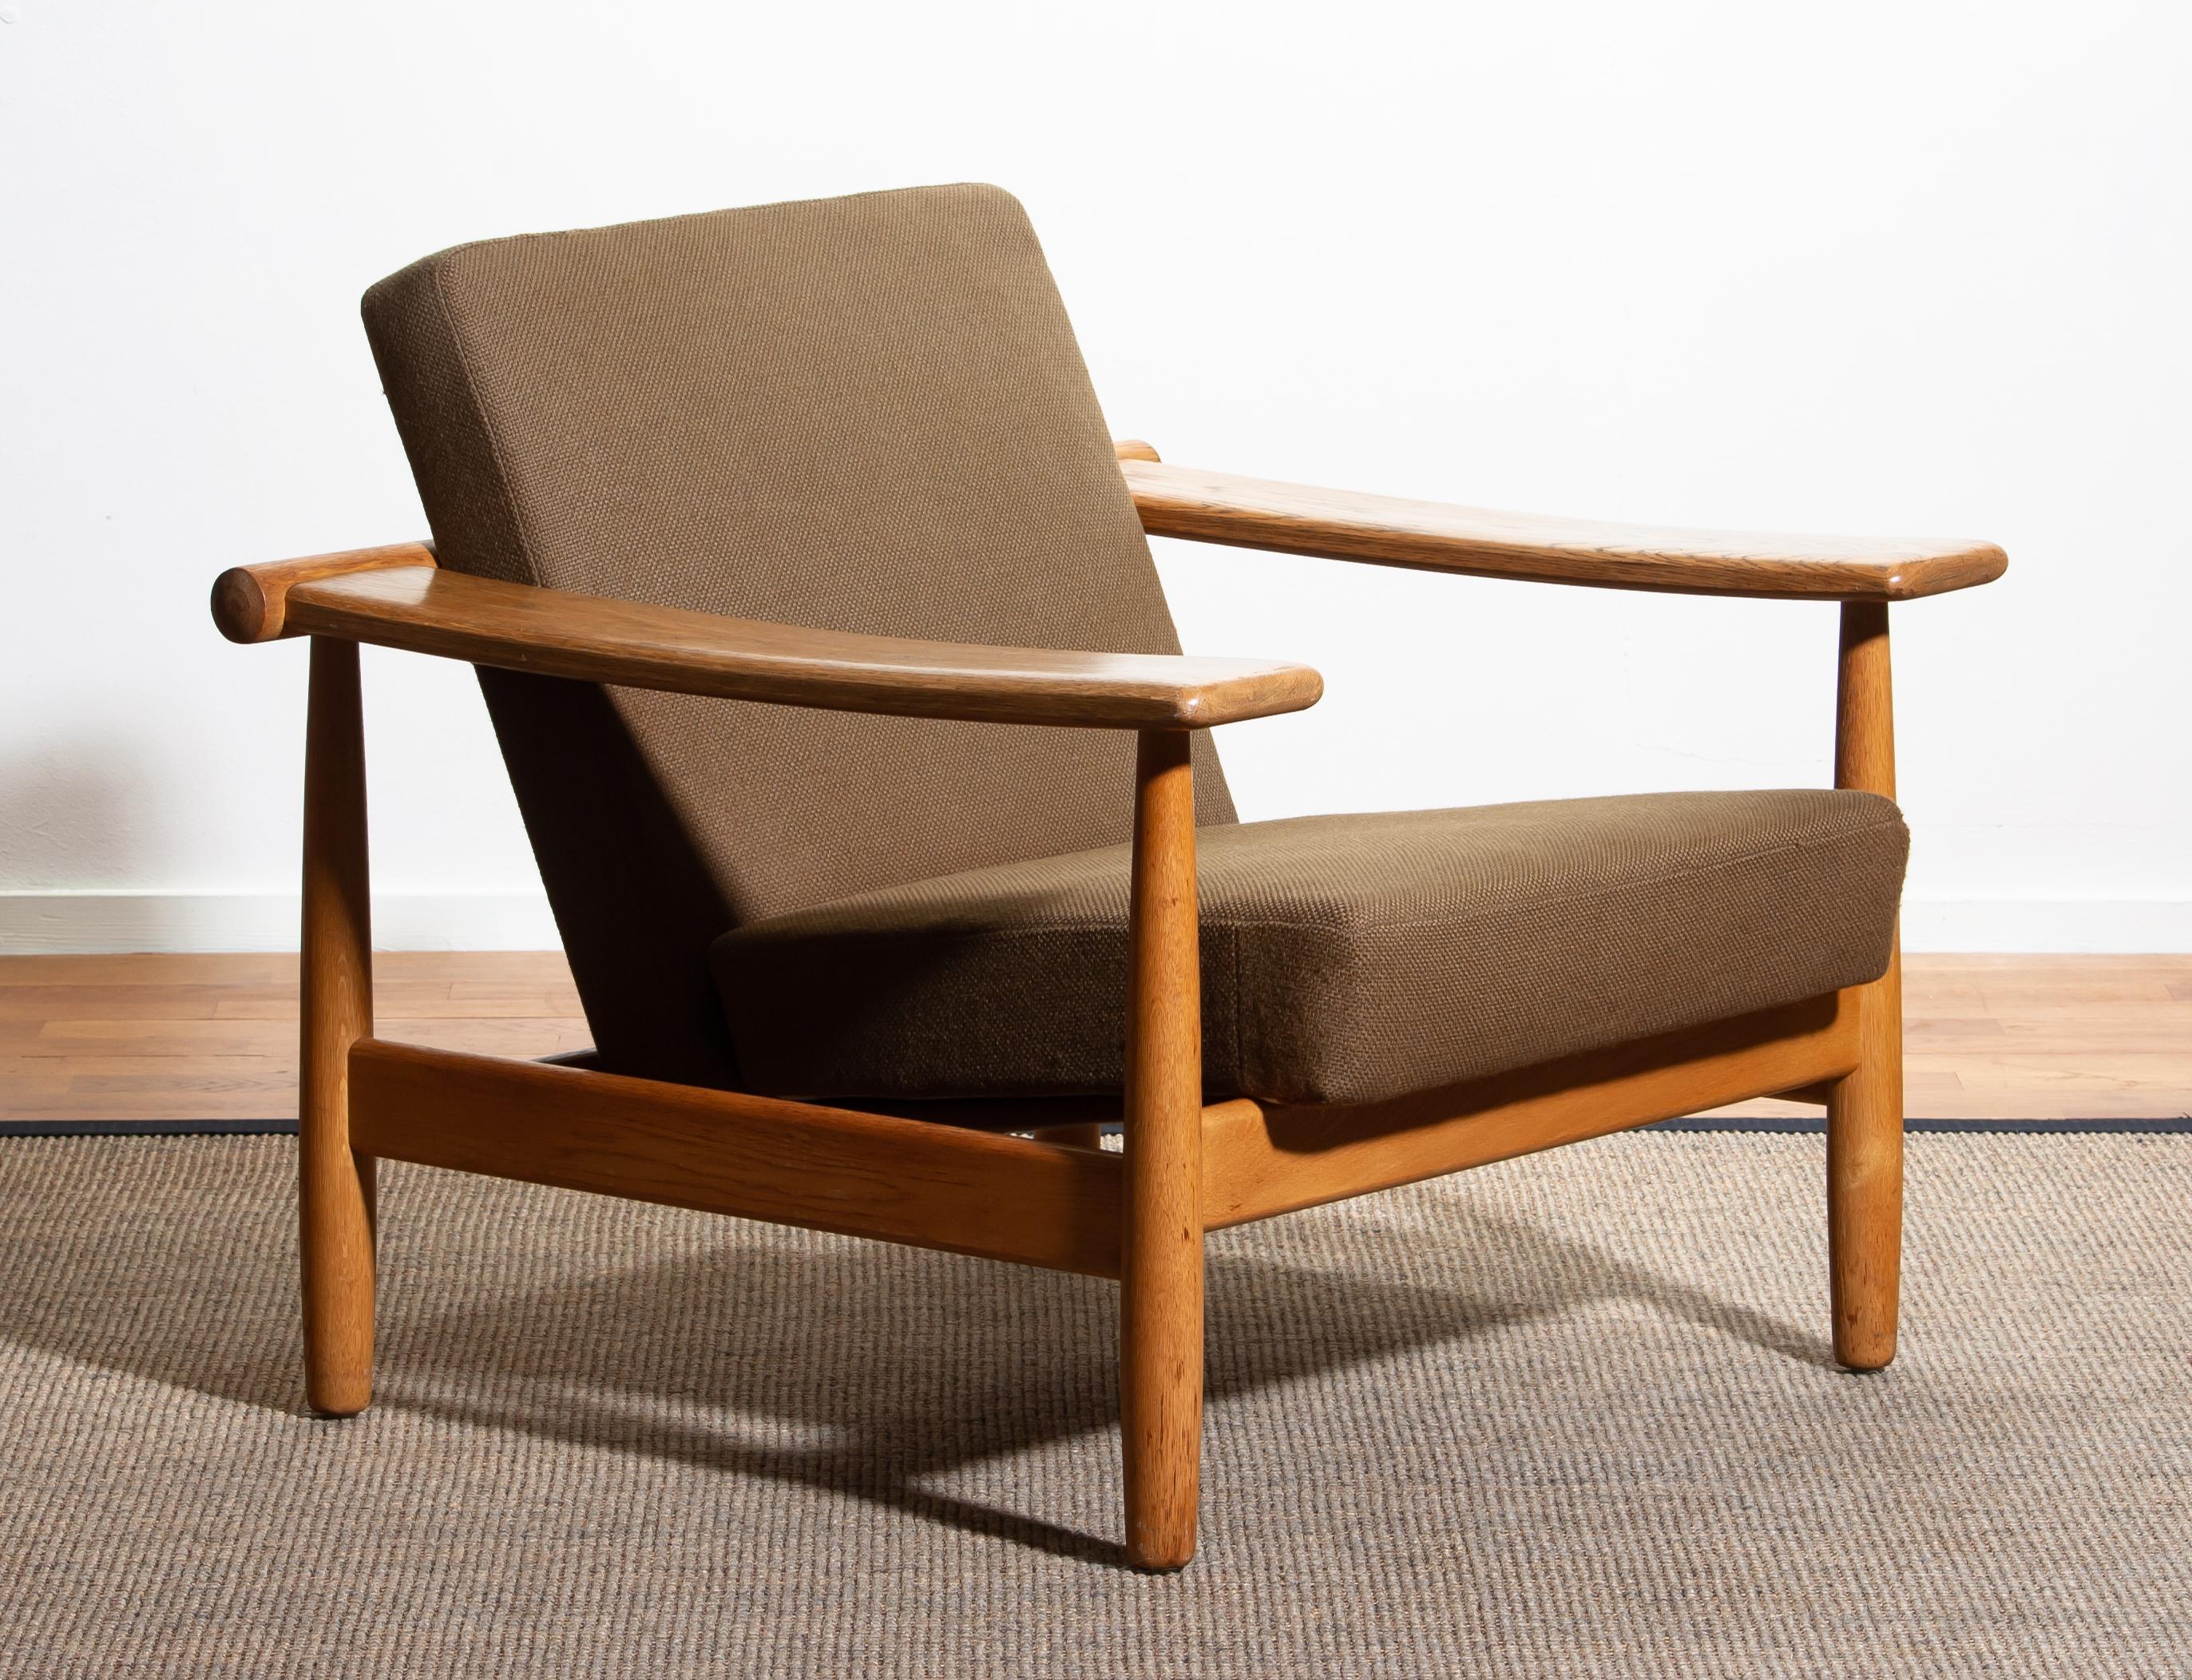 Danish 1960s, Oak Sofa and Lounge Chair or Living Room Set from Denmark